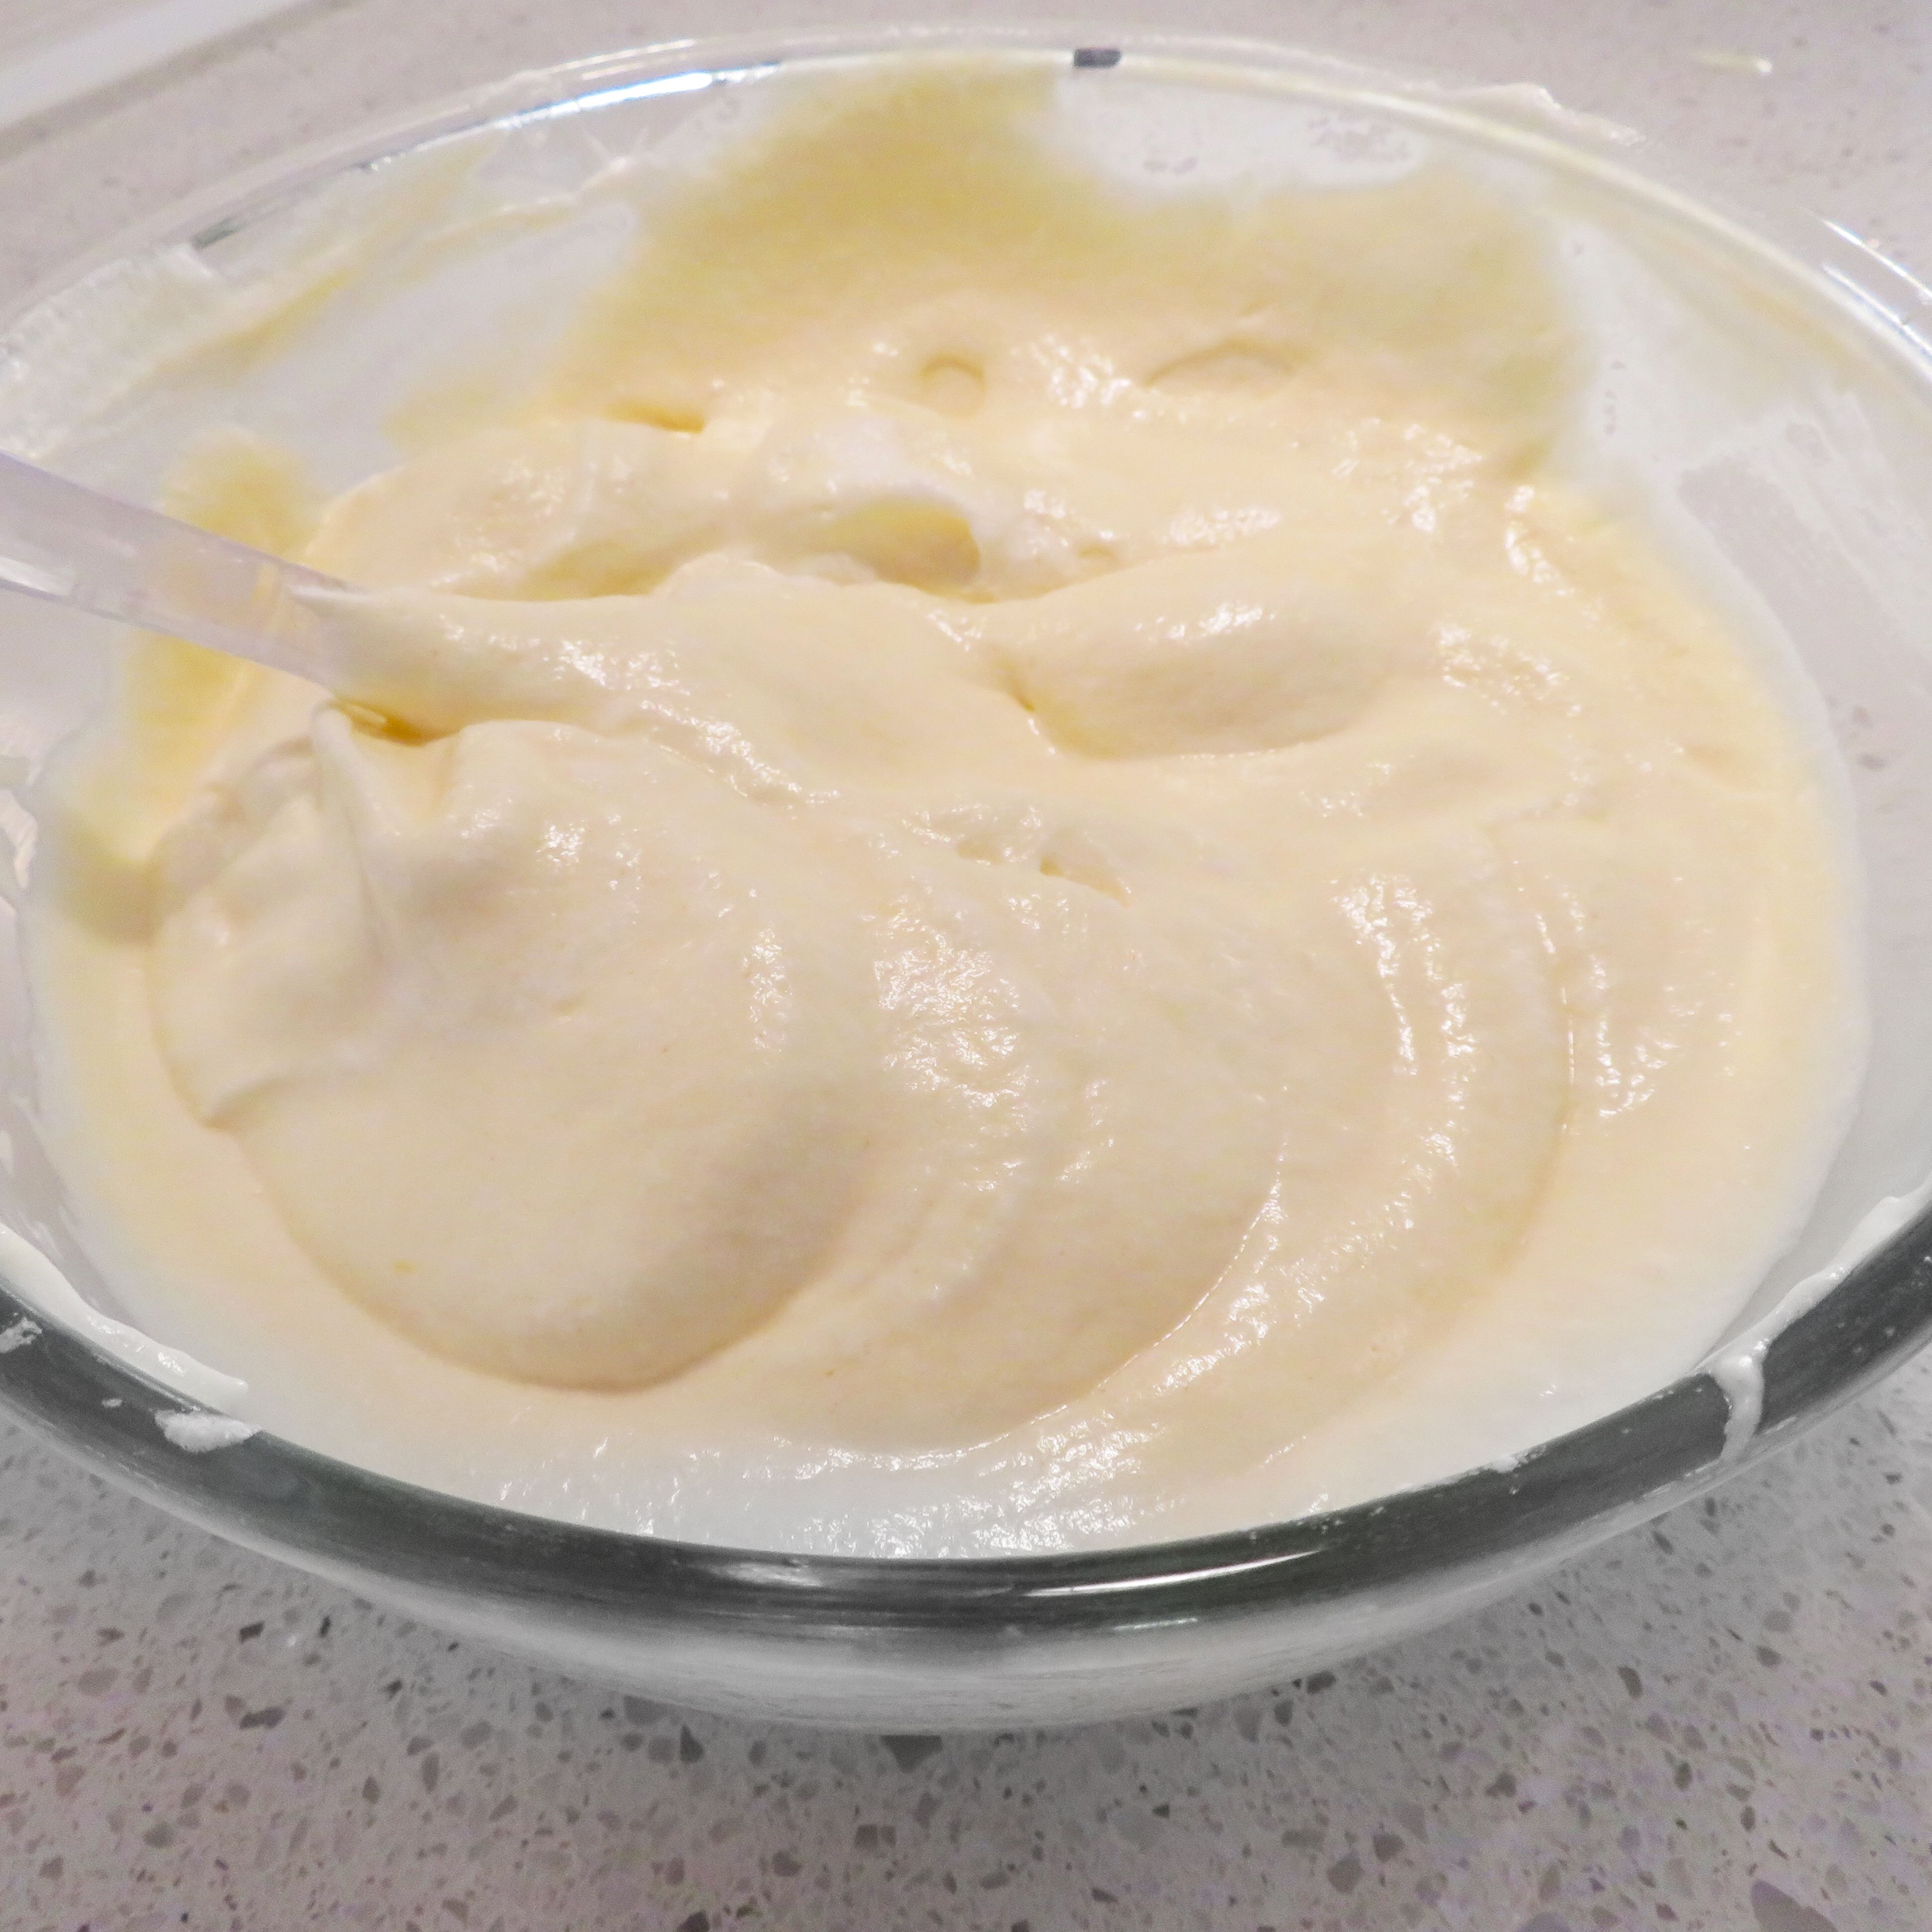 Slowly fold egg white into the mixture until light and fluffy.